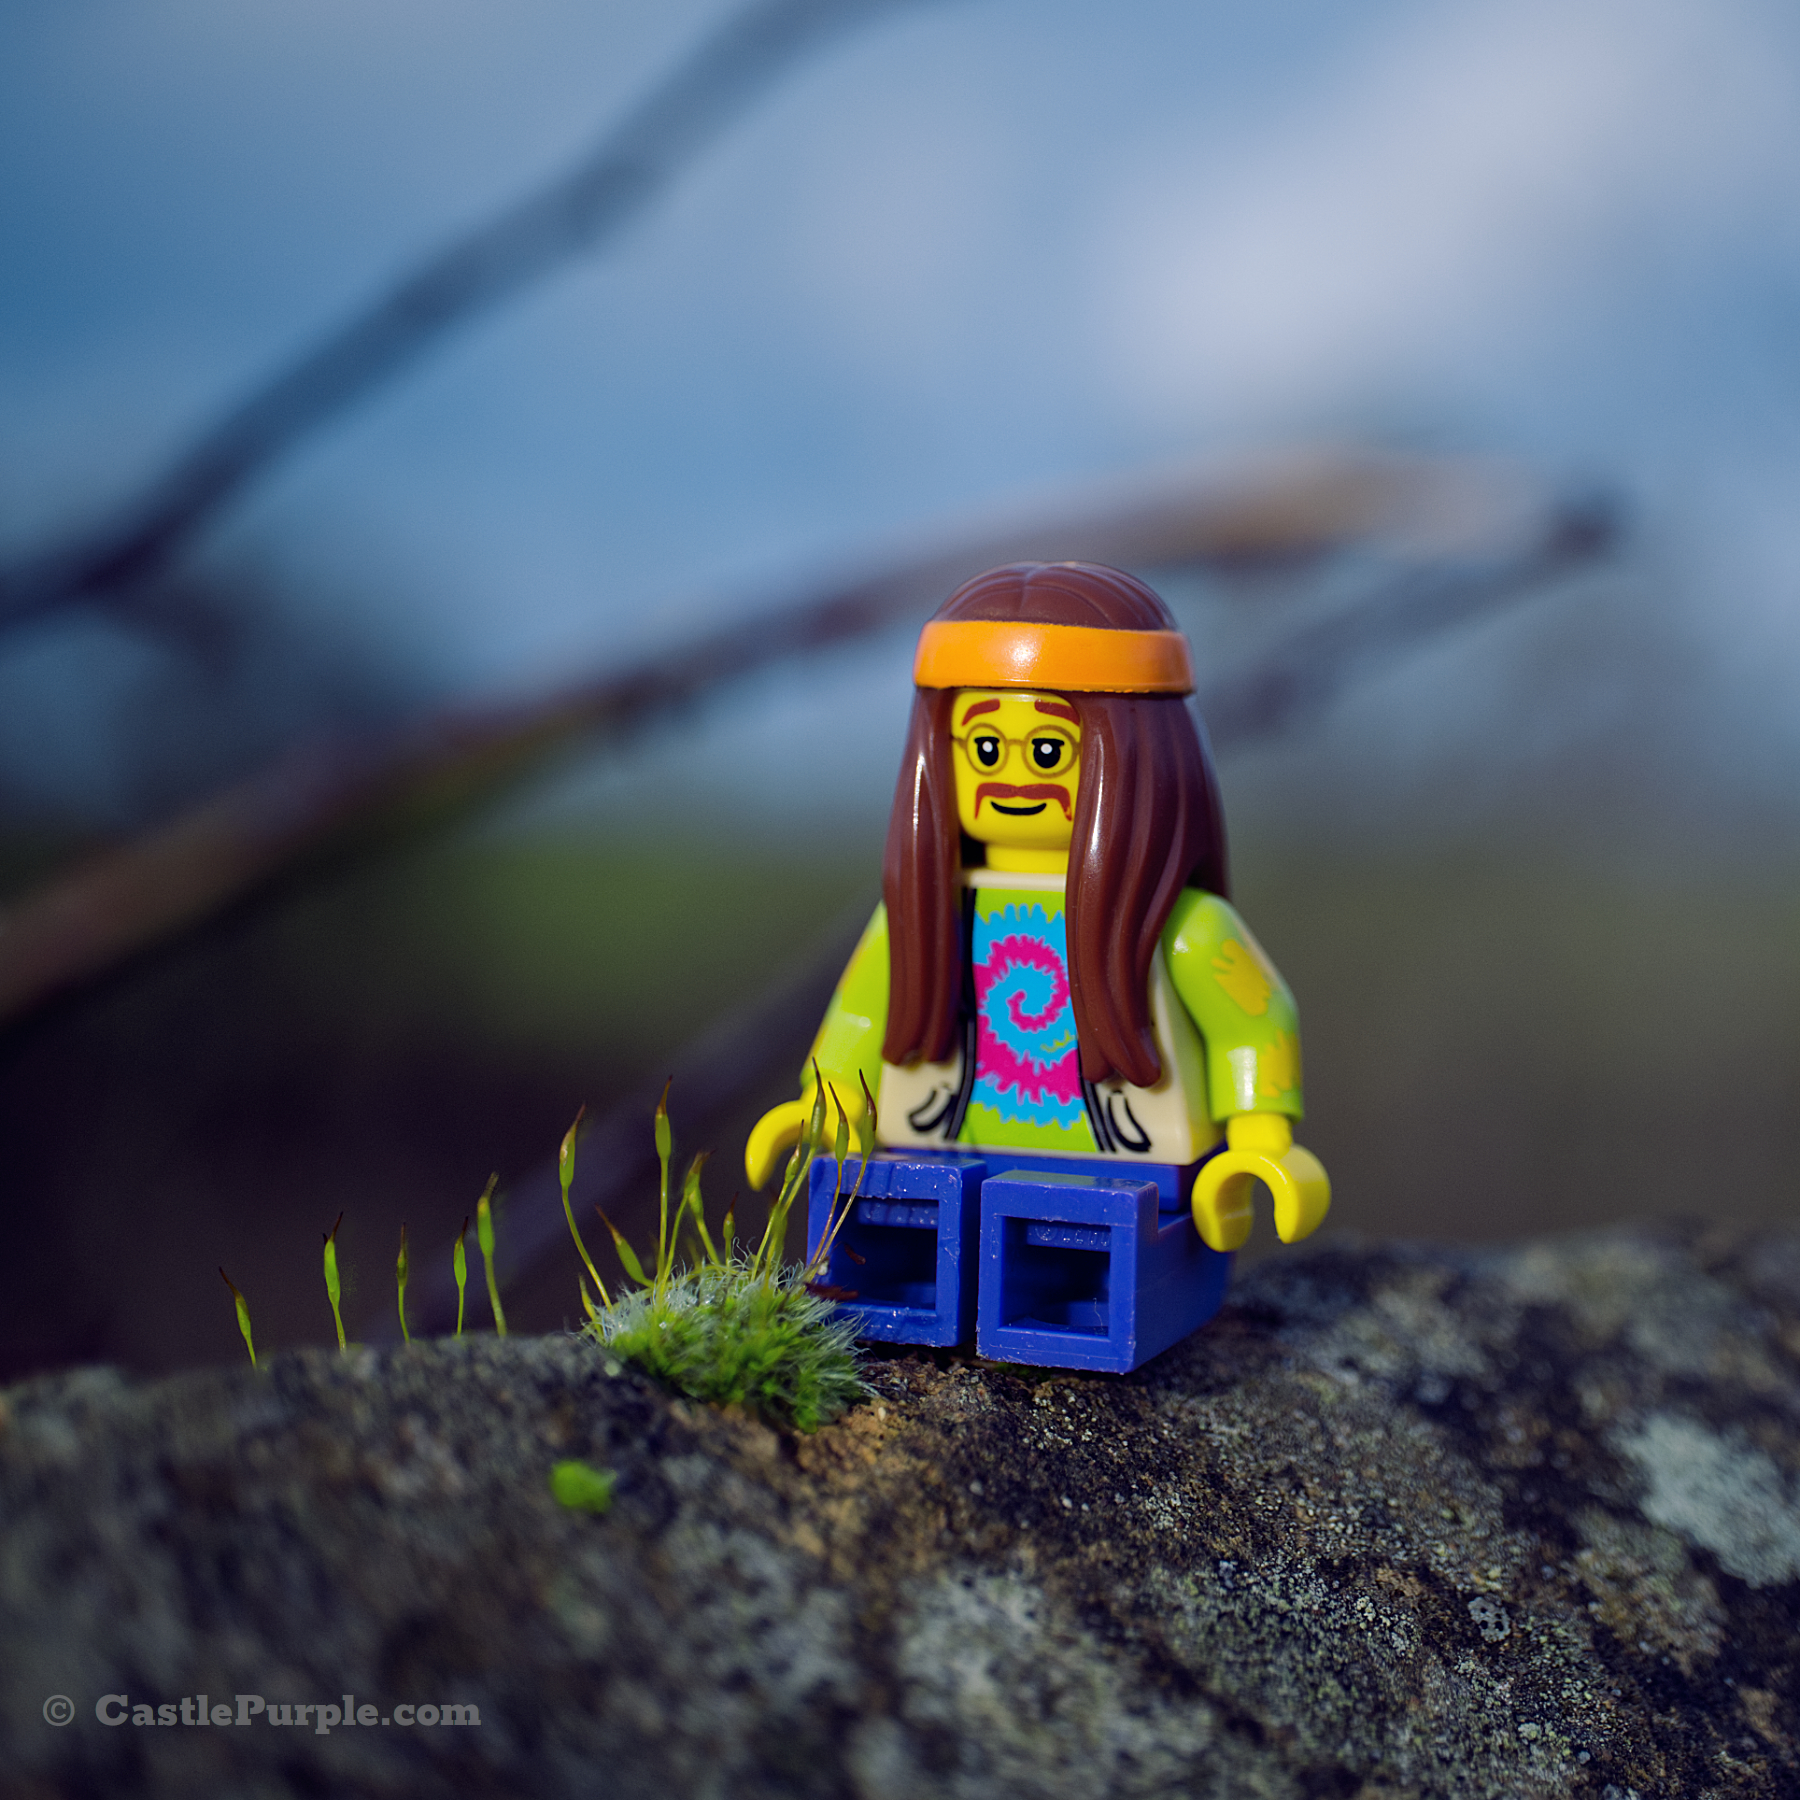 The 'Hippie' Lego minifigure sits staring at a small plant in front of him.